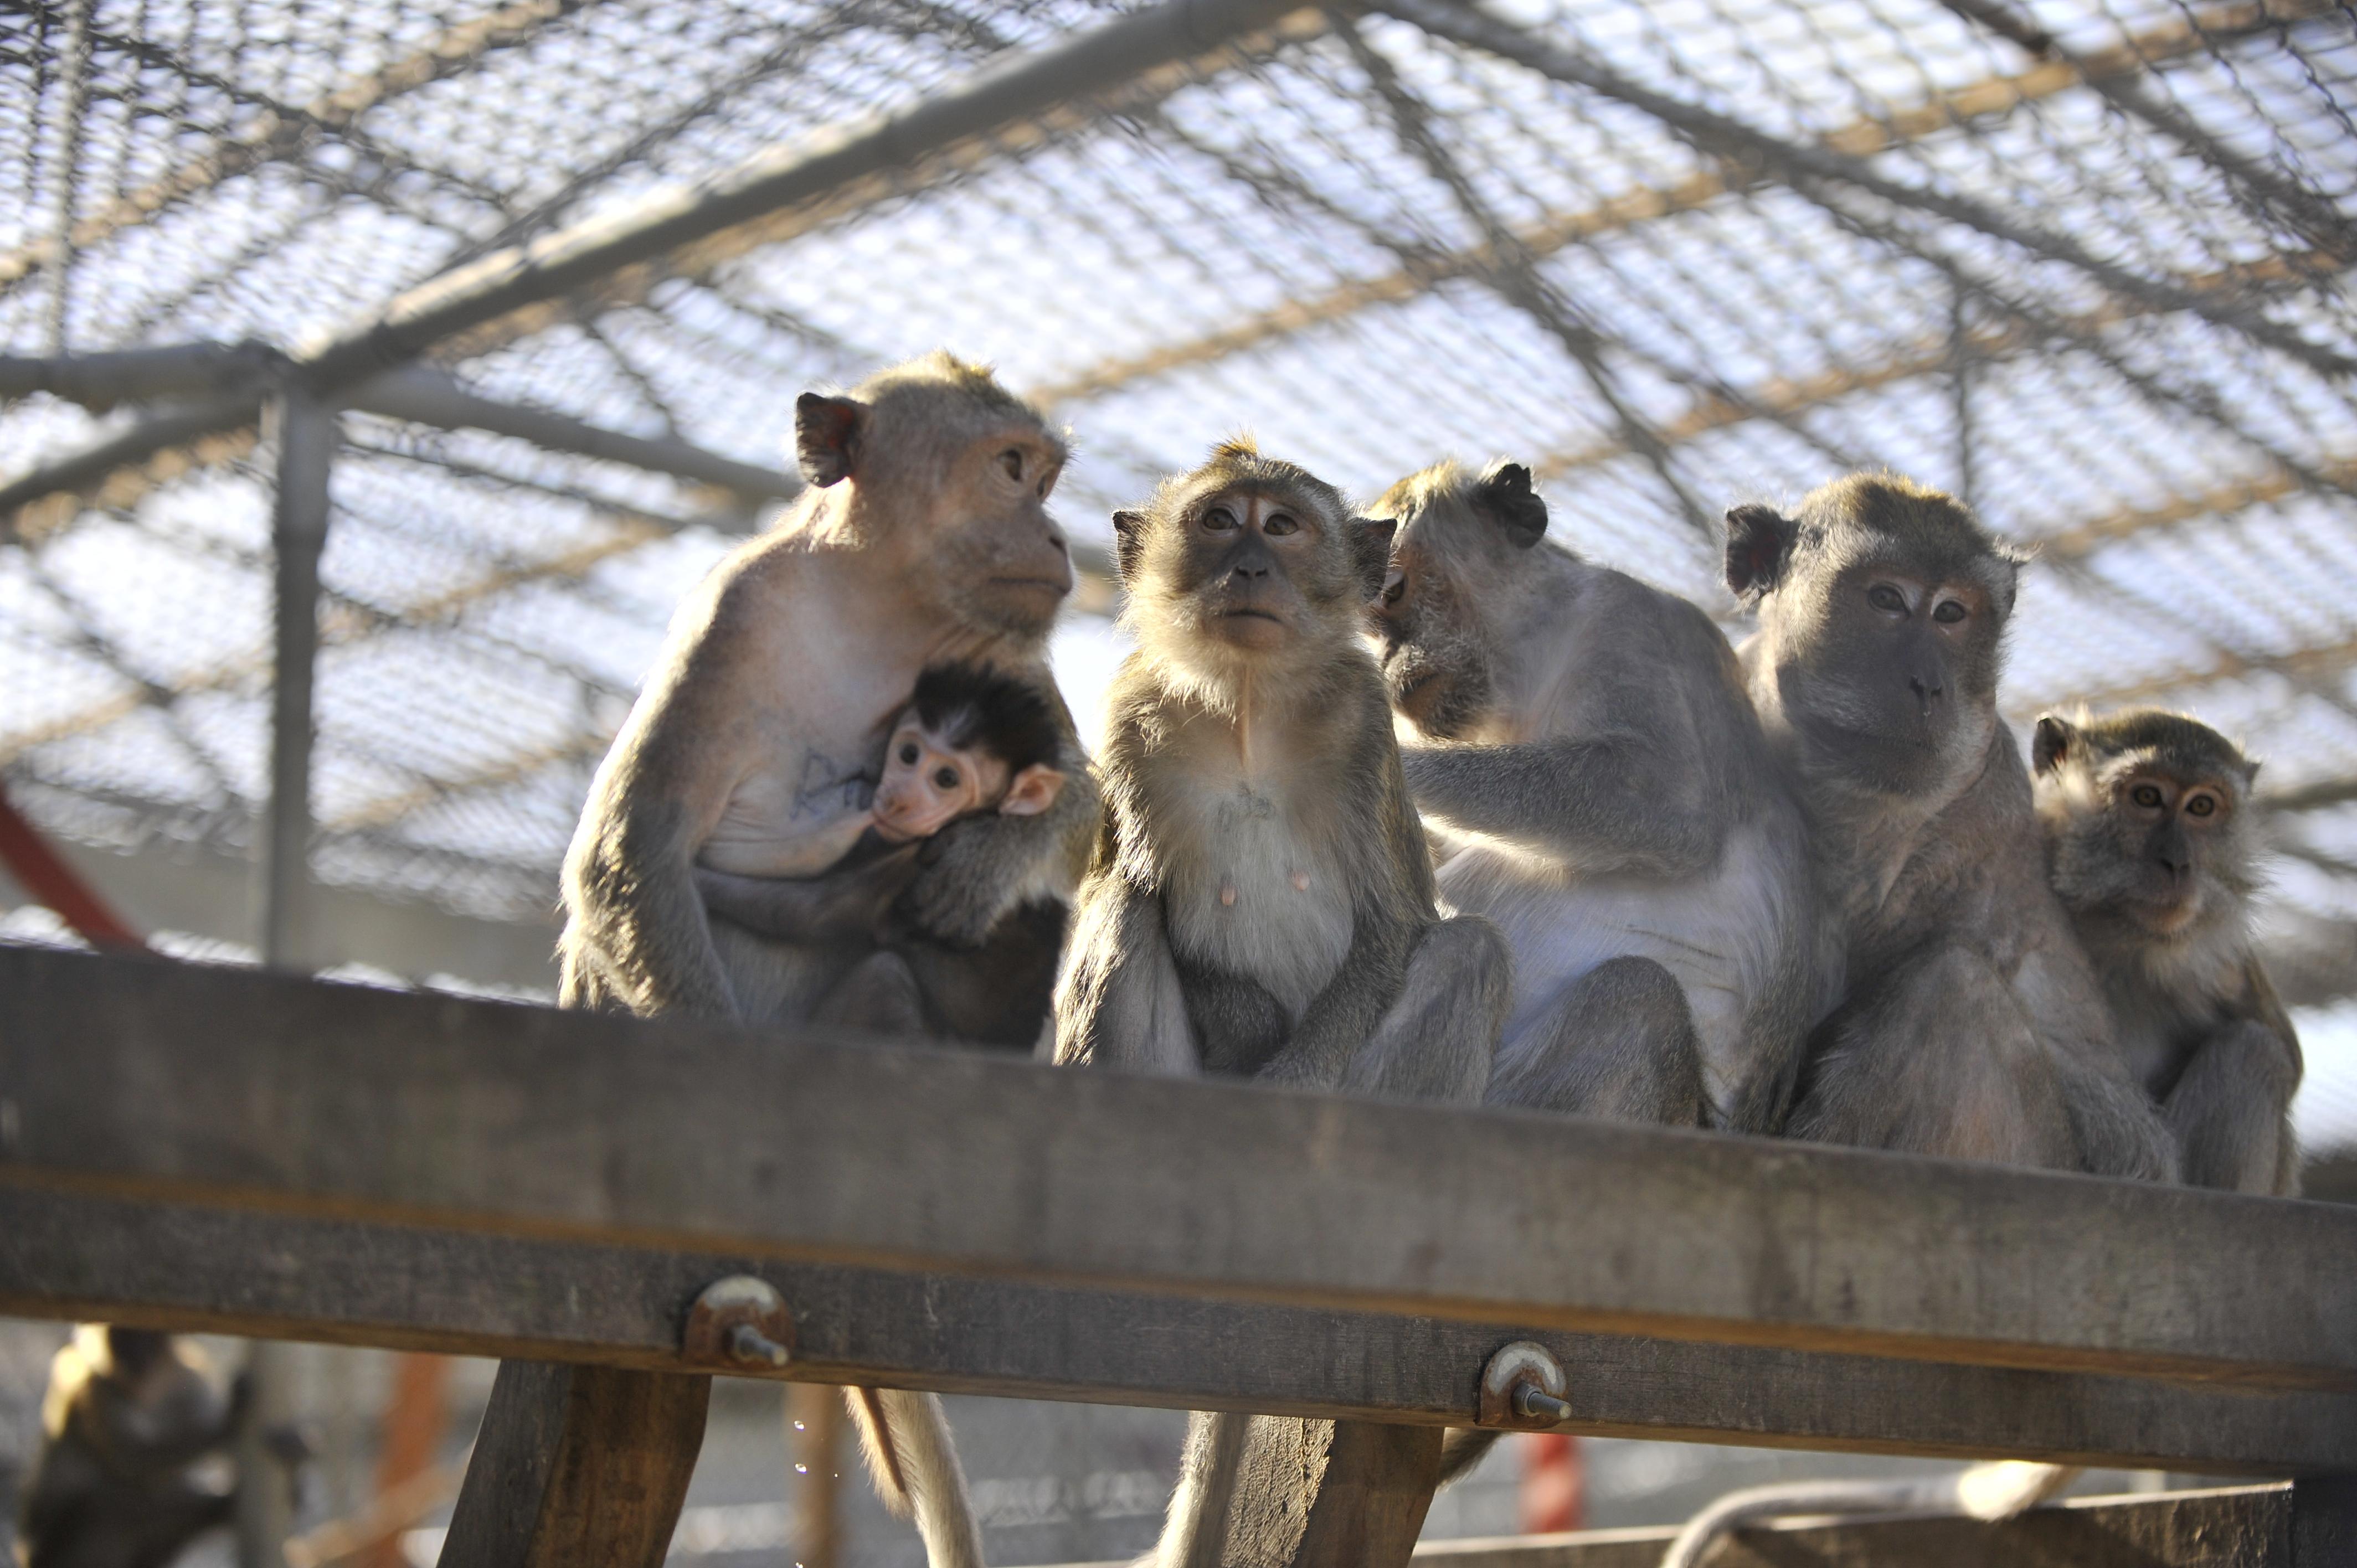  A group of macaques, including an infant, huddle together on a shelf in their outdoor enclosure